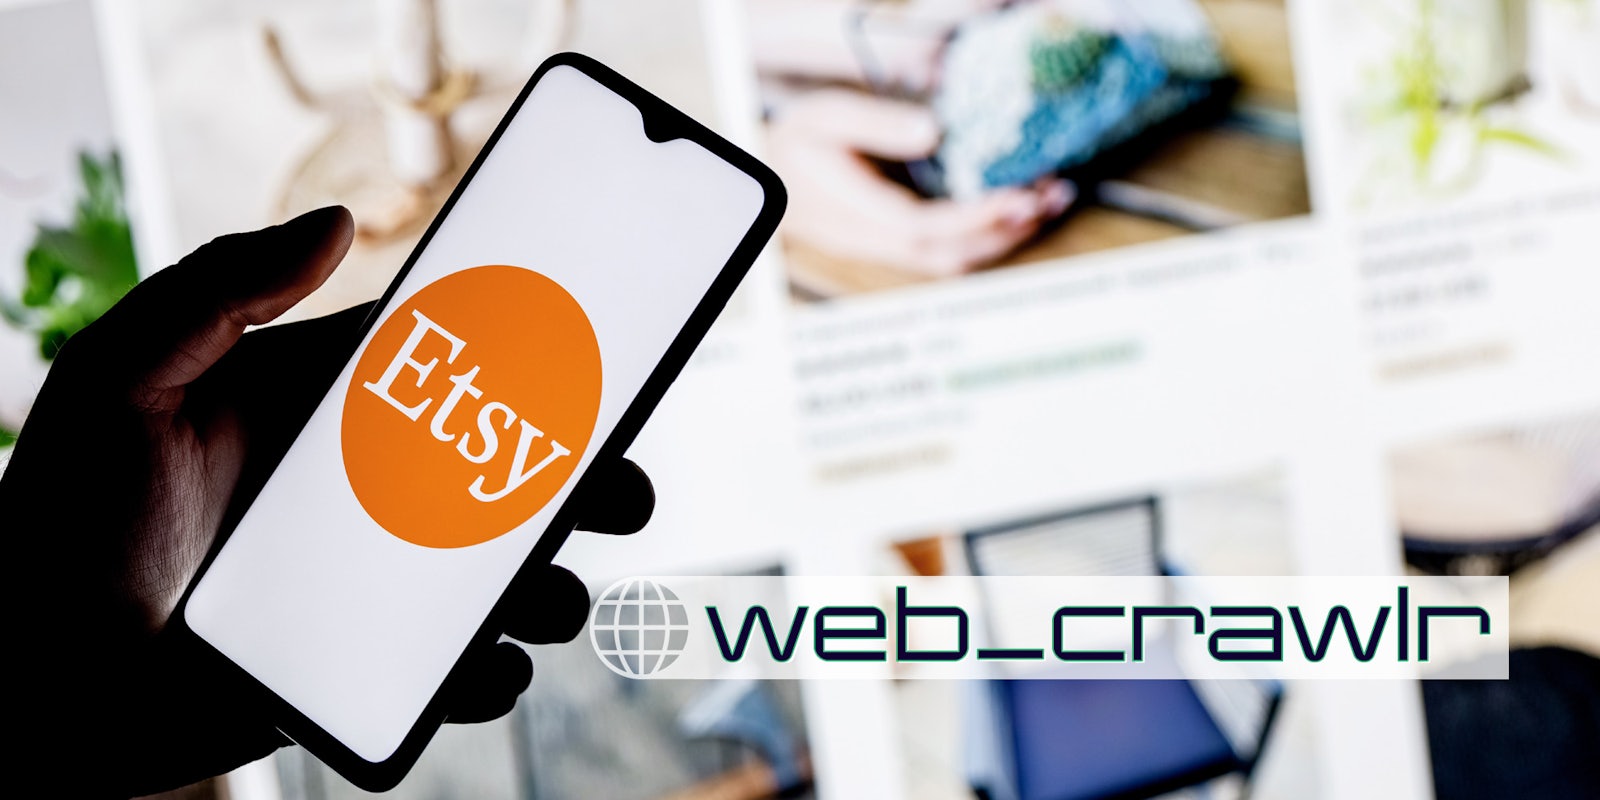 A smartphone with the Etsy logo in a hand. The Daily Dot newsletter web_crawlr logo is in the bottom right corner.